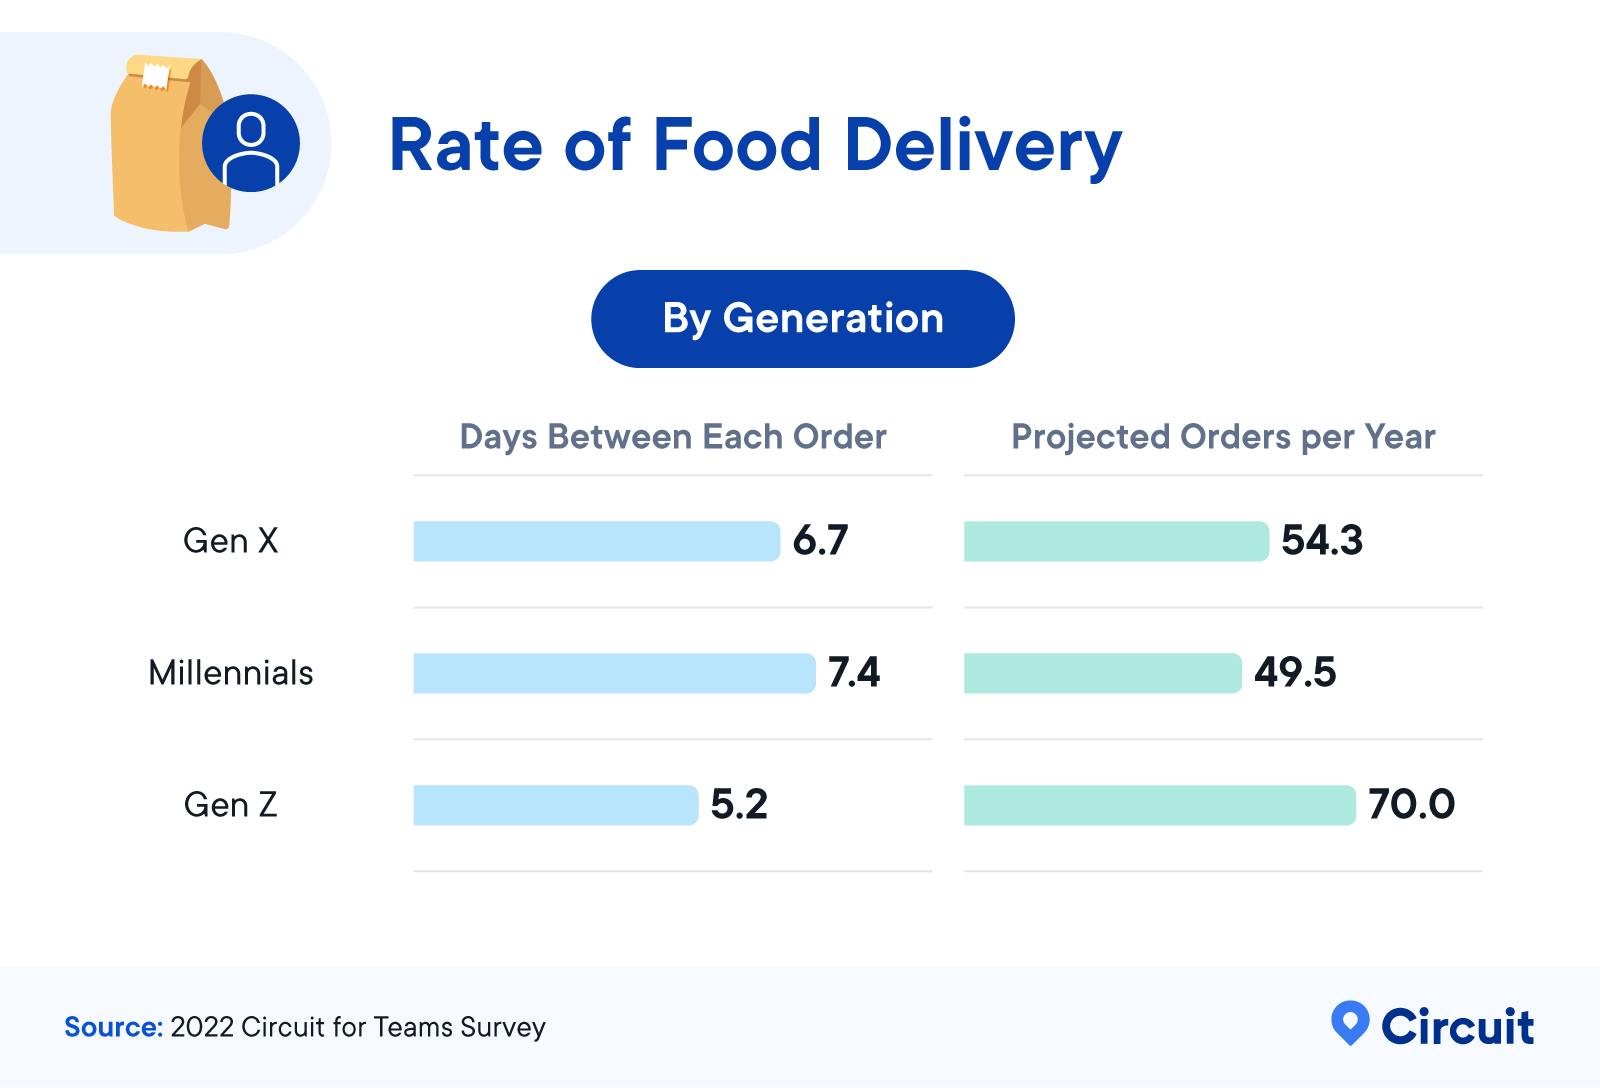 Rate of Food Delivery by Generation